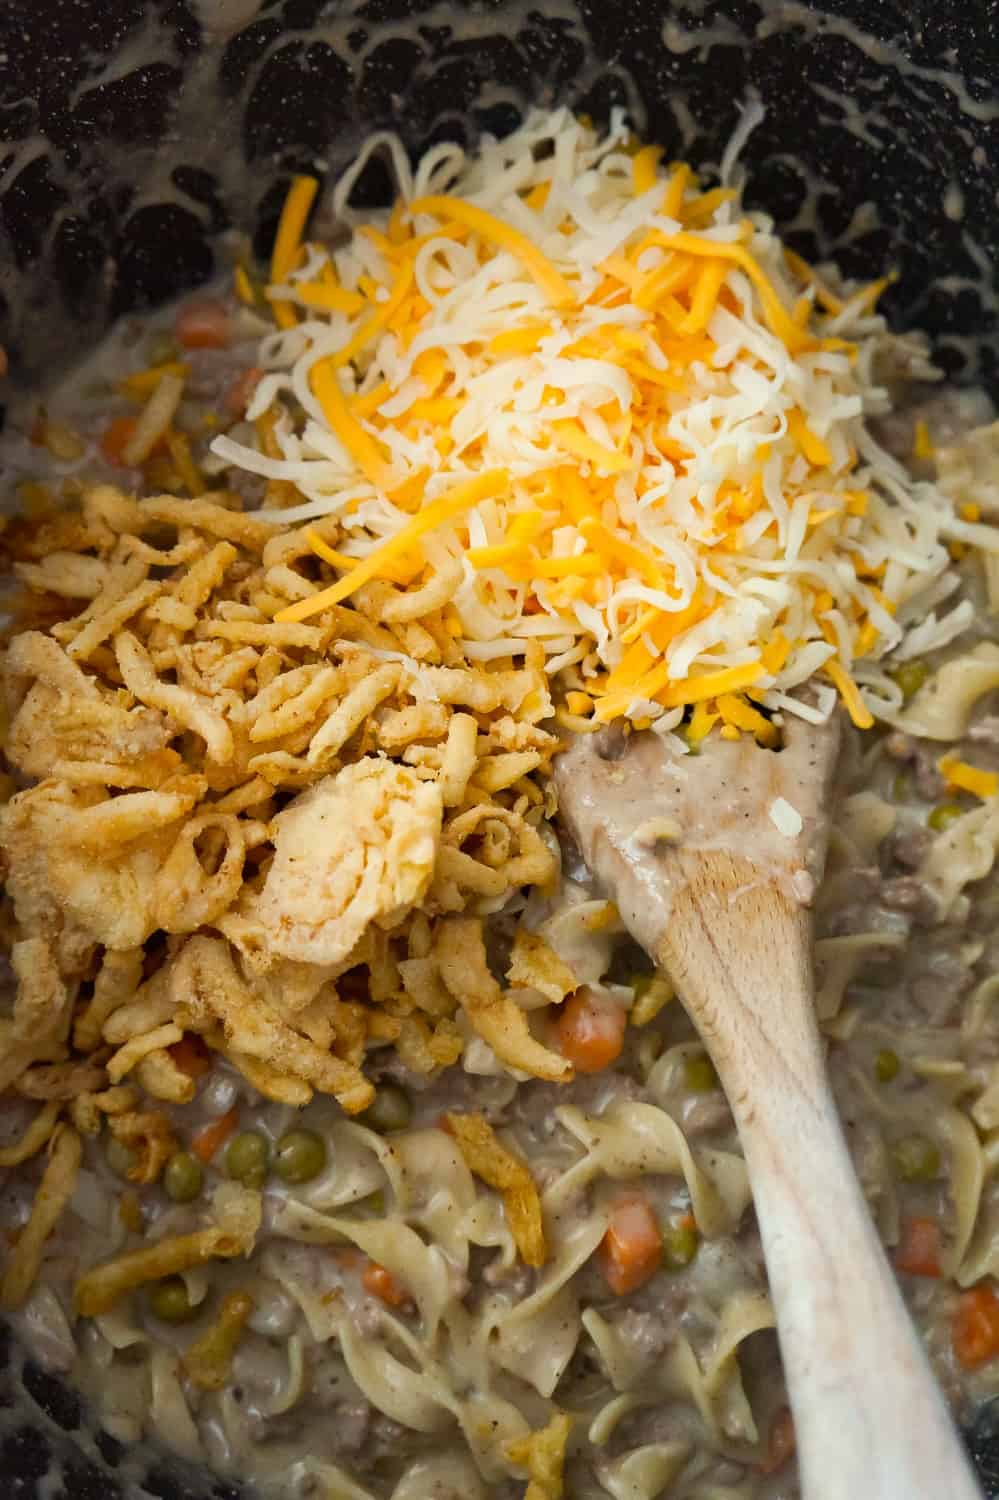 French's fried onions and shredded cheese and to beef and noodle mixture in a large pot